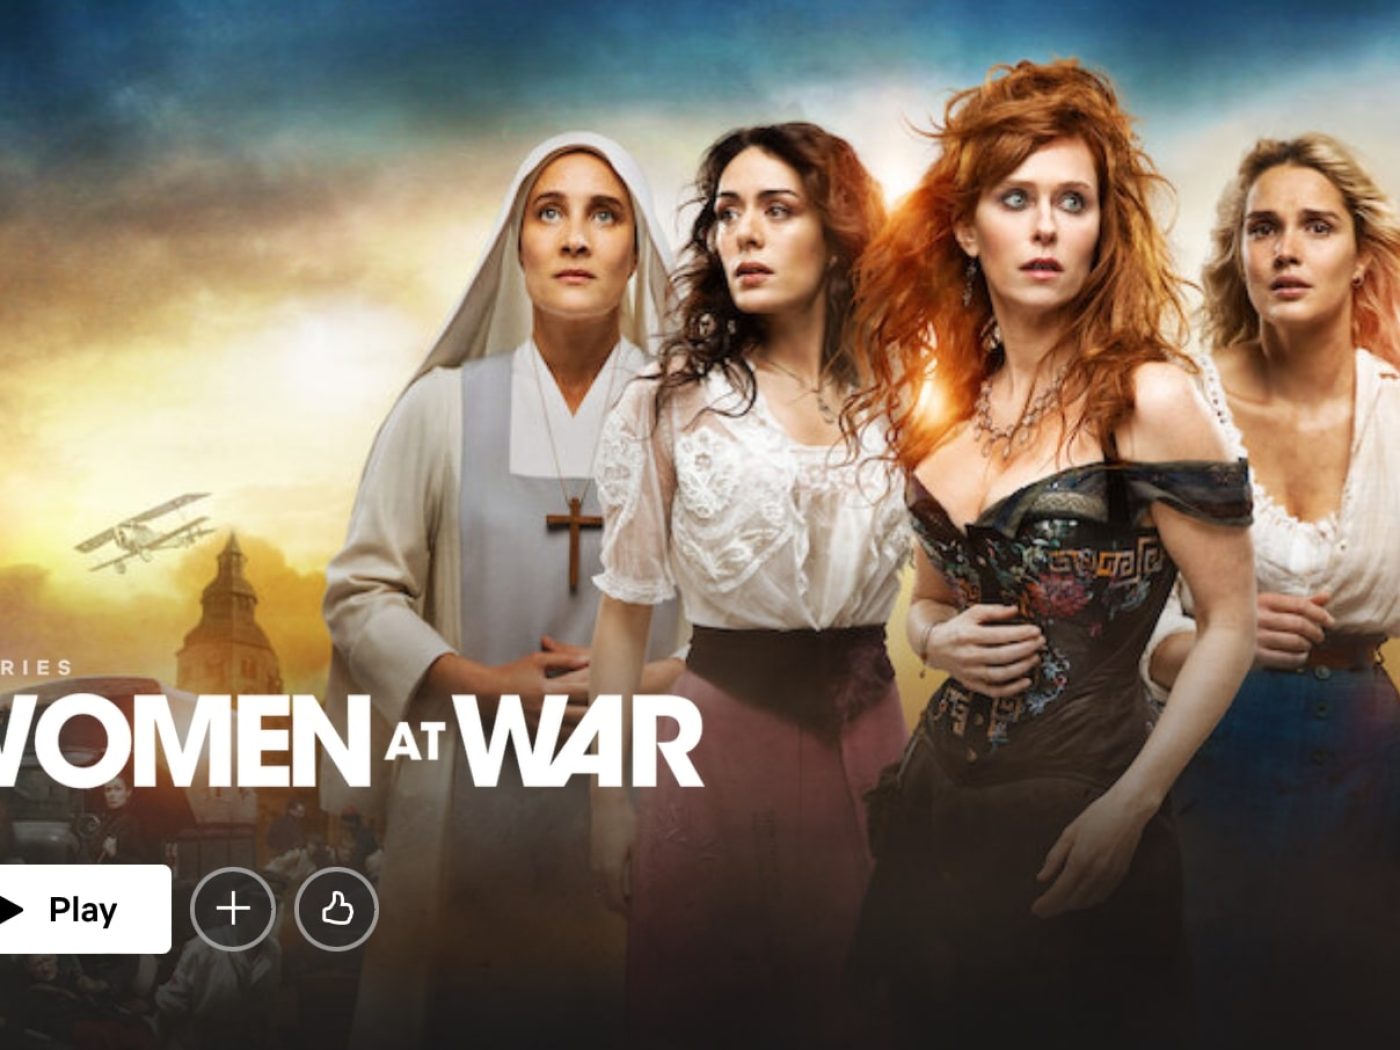 Netflix's new WWI drama Women at War is one of the top series in